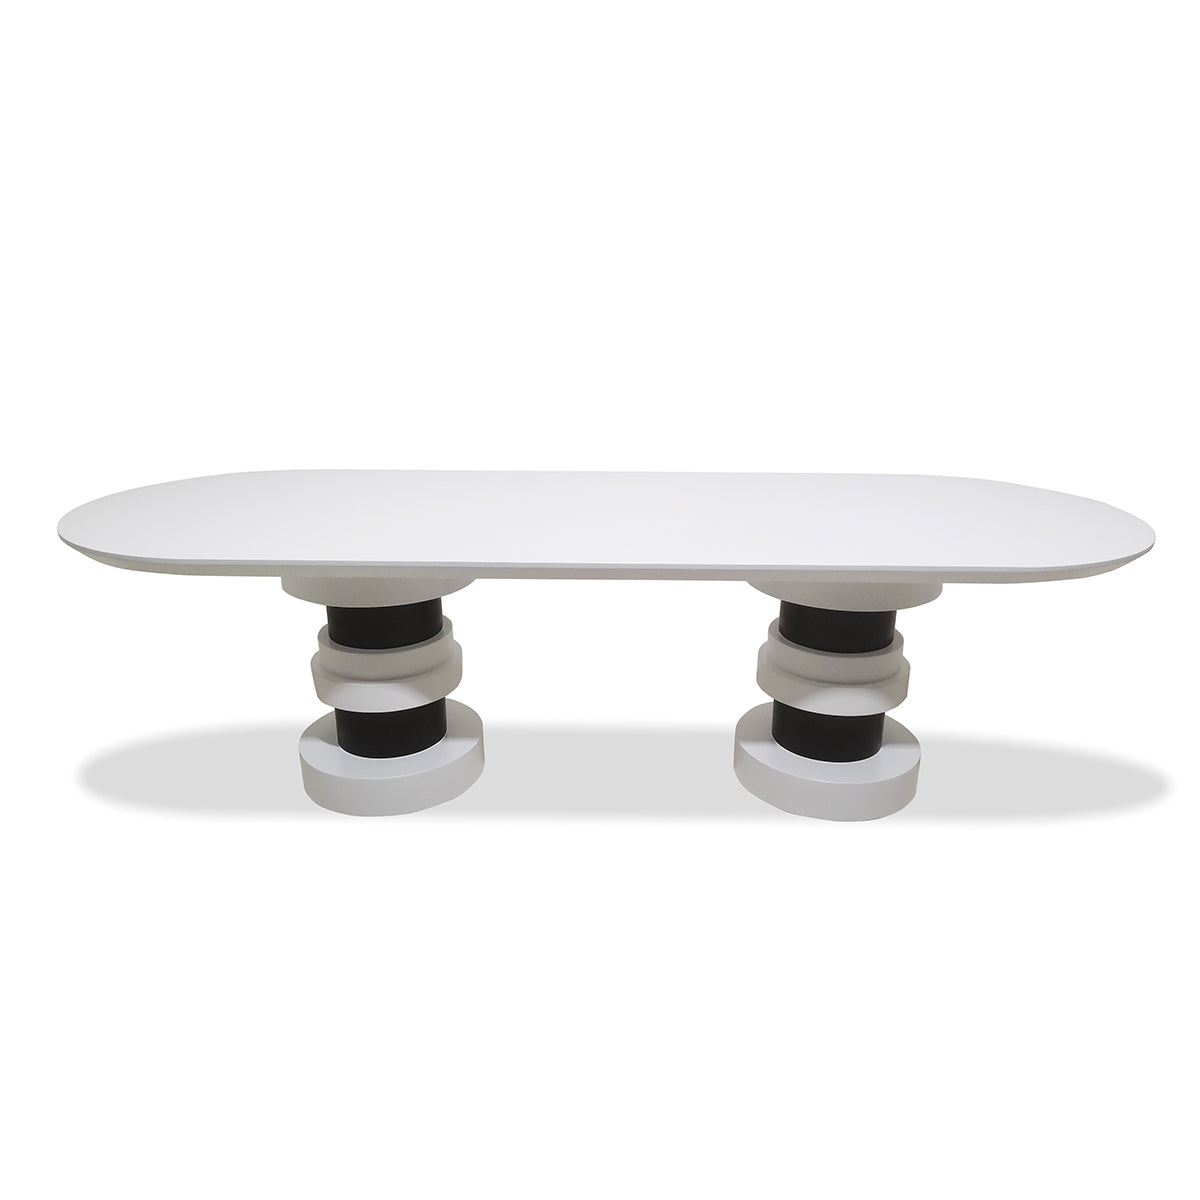 Boca Dining Table in Double Black and White Pedestal with Matte White Top